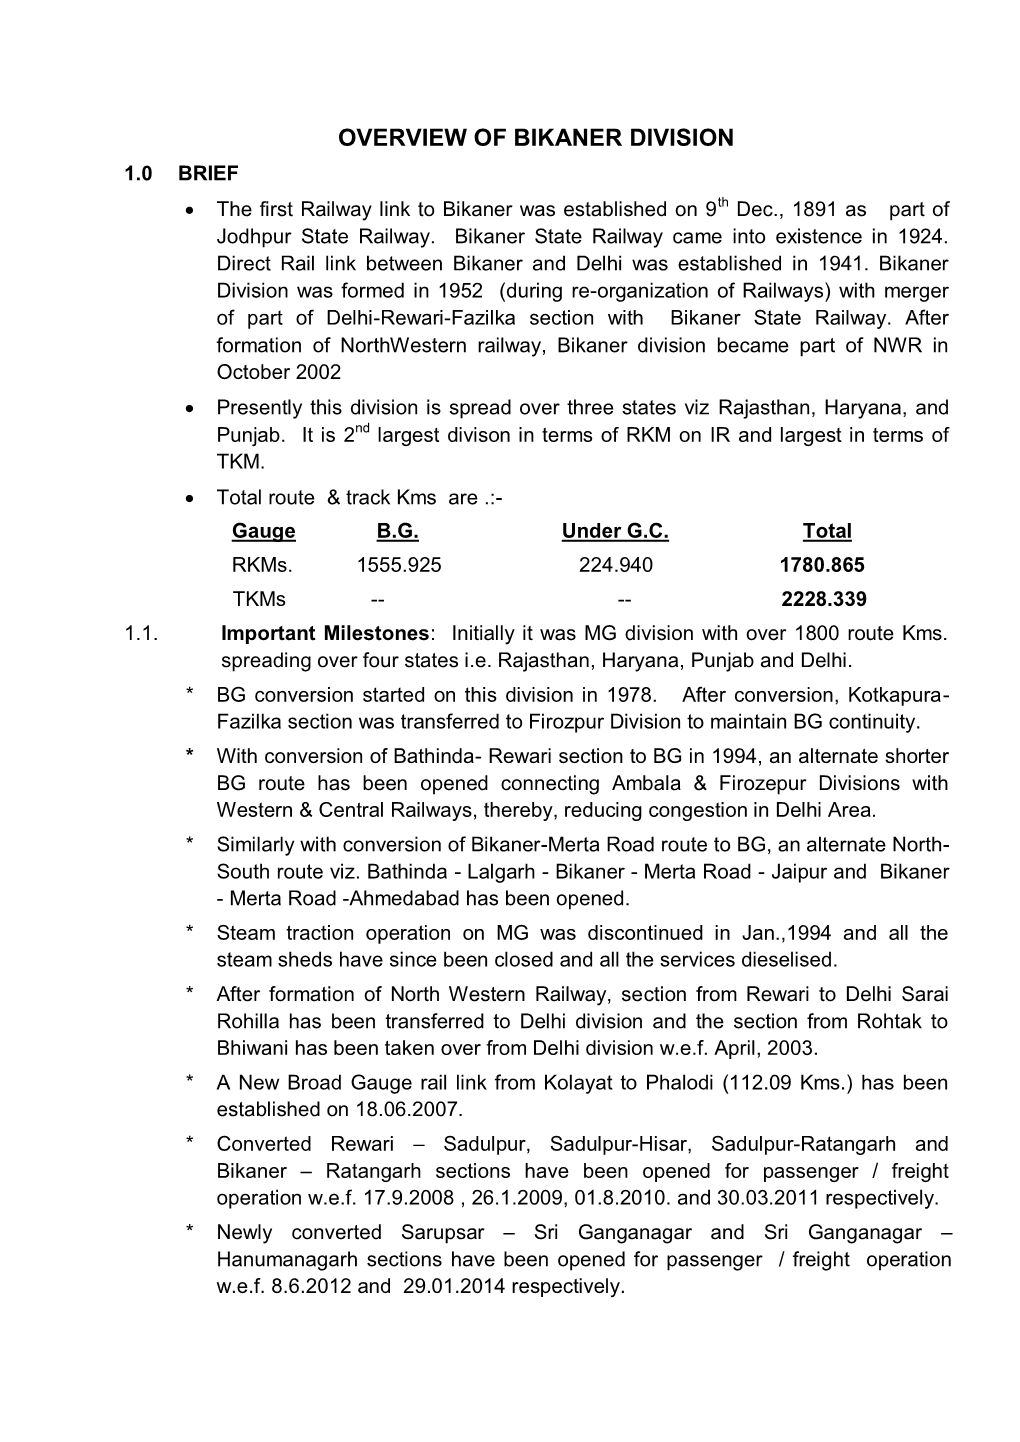 OVERVIEW of BIKANER DIVISION 1.0 BRIEF  the First Railway Link to Bikaner Was Established on 9Th Dec., 1891 As Part of Jodhpur State Railway